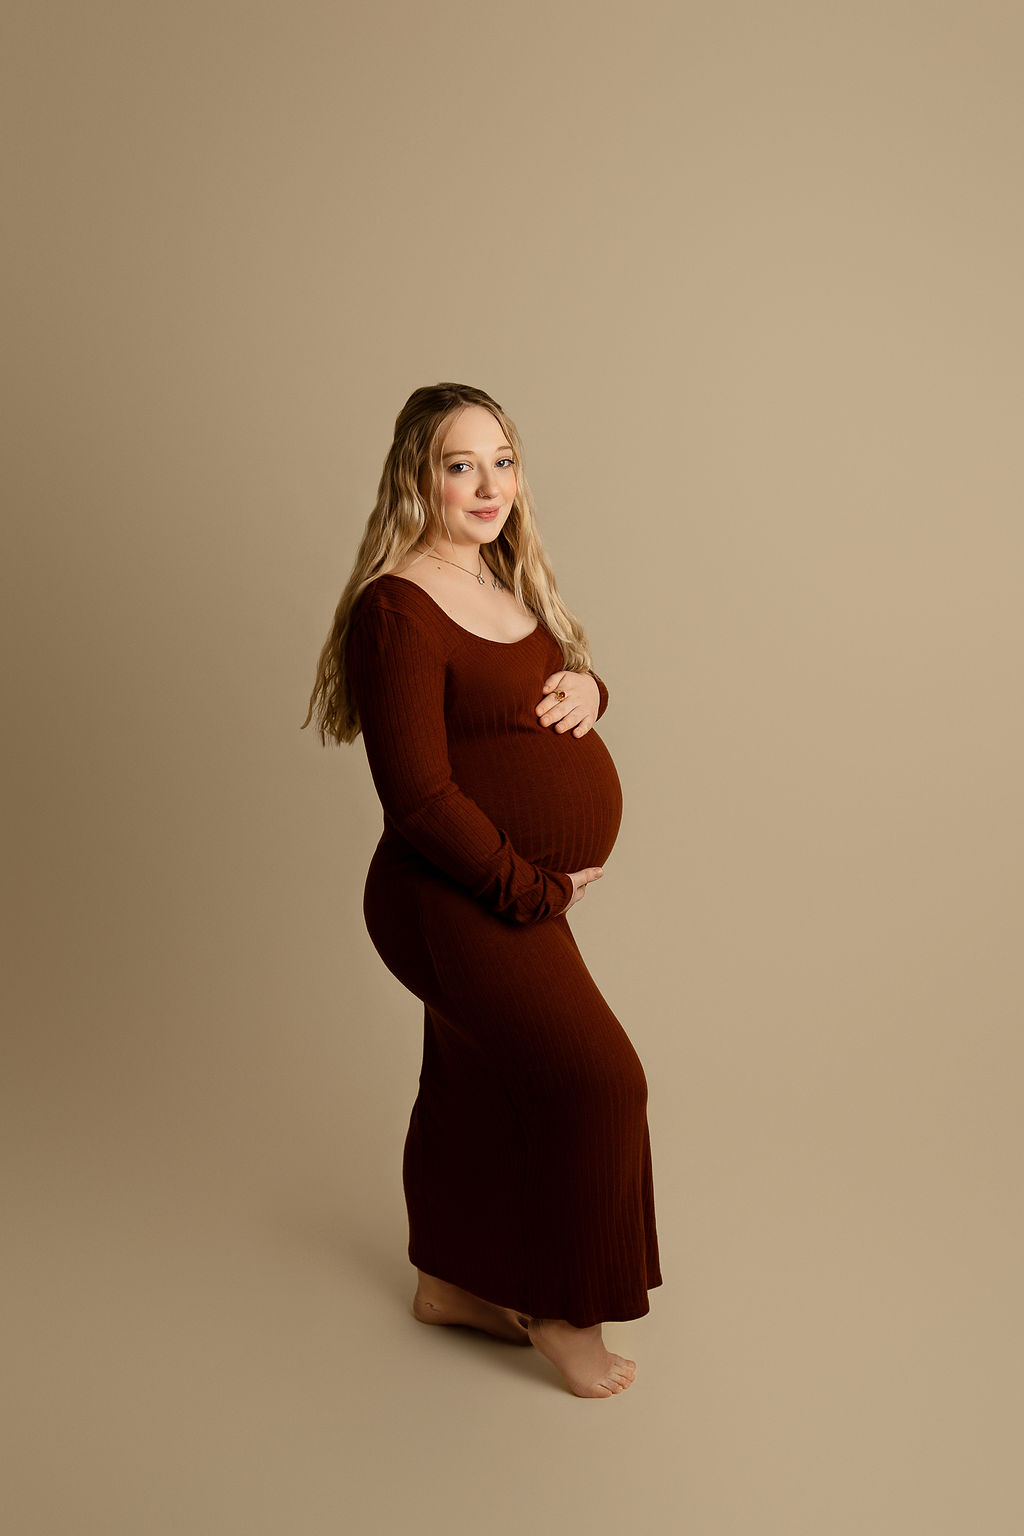 A blonde mother to be smiles while holding her bump and standing in a studio